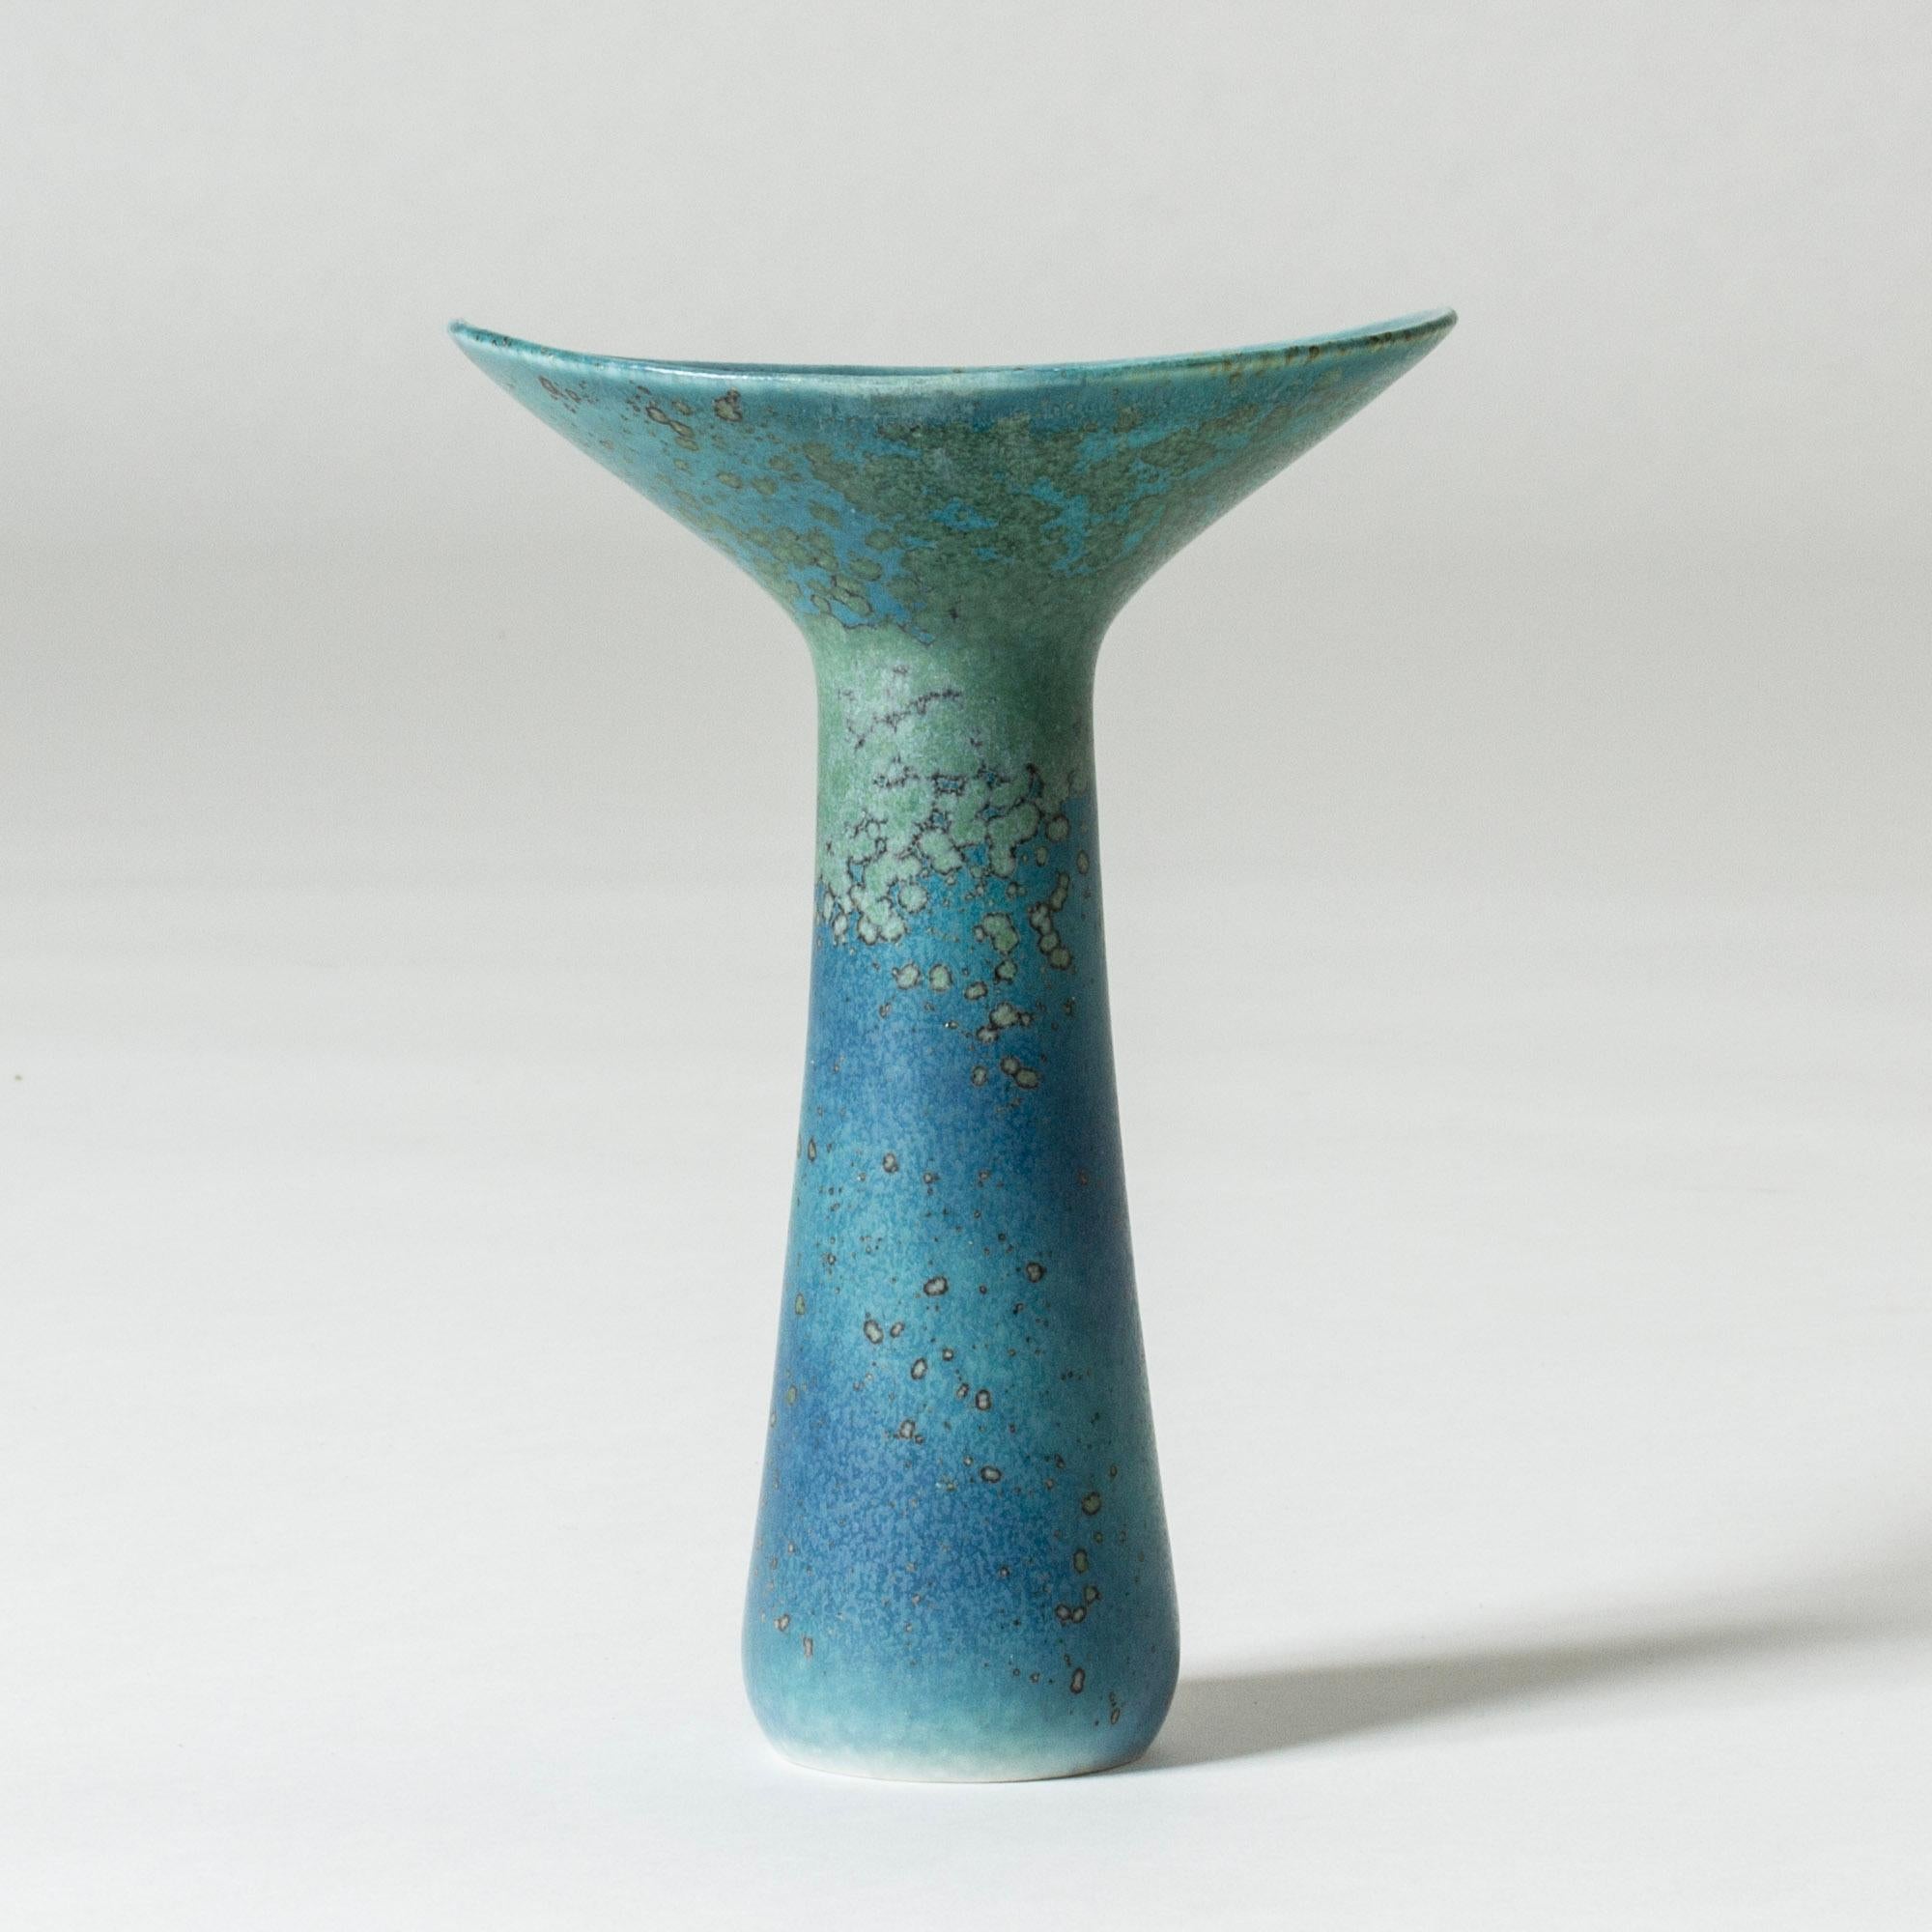 Stoneware vase by Carl-Harry Stålhane in an beautiful form with a wide-rimmed mouth and slender body. Striking glaze in ocean blue and turquoise tones.

Carl-Harry Stålhane was one of the stars among Swedish ceramic artists during the 1950s, 1960s